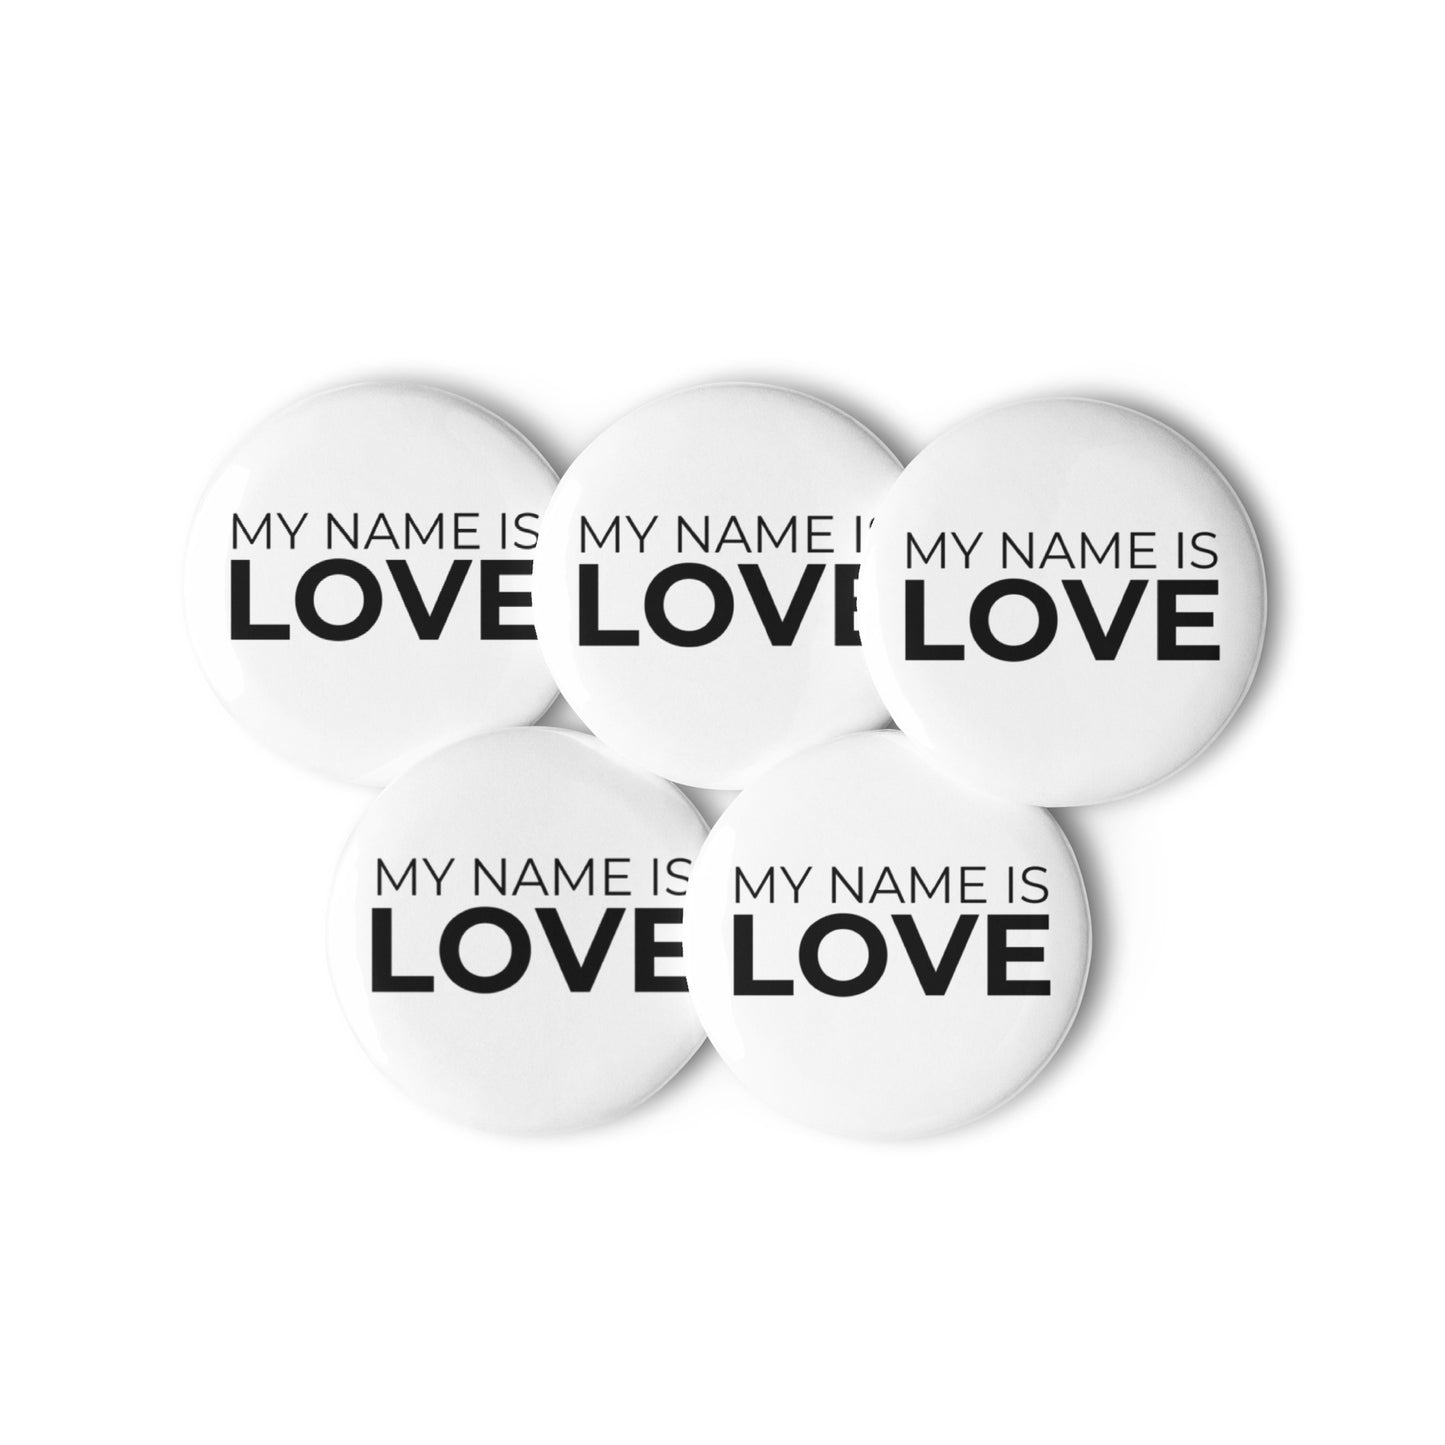 My Name Is Love: set of 5 pins / buttons